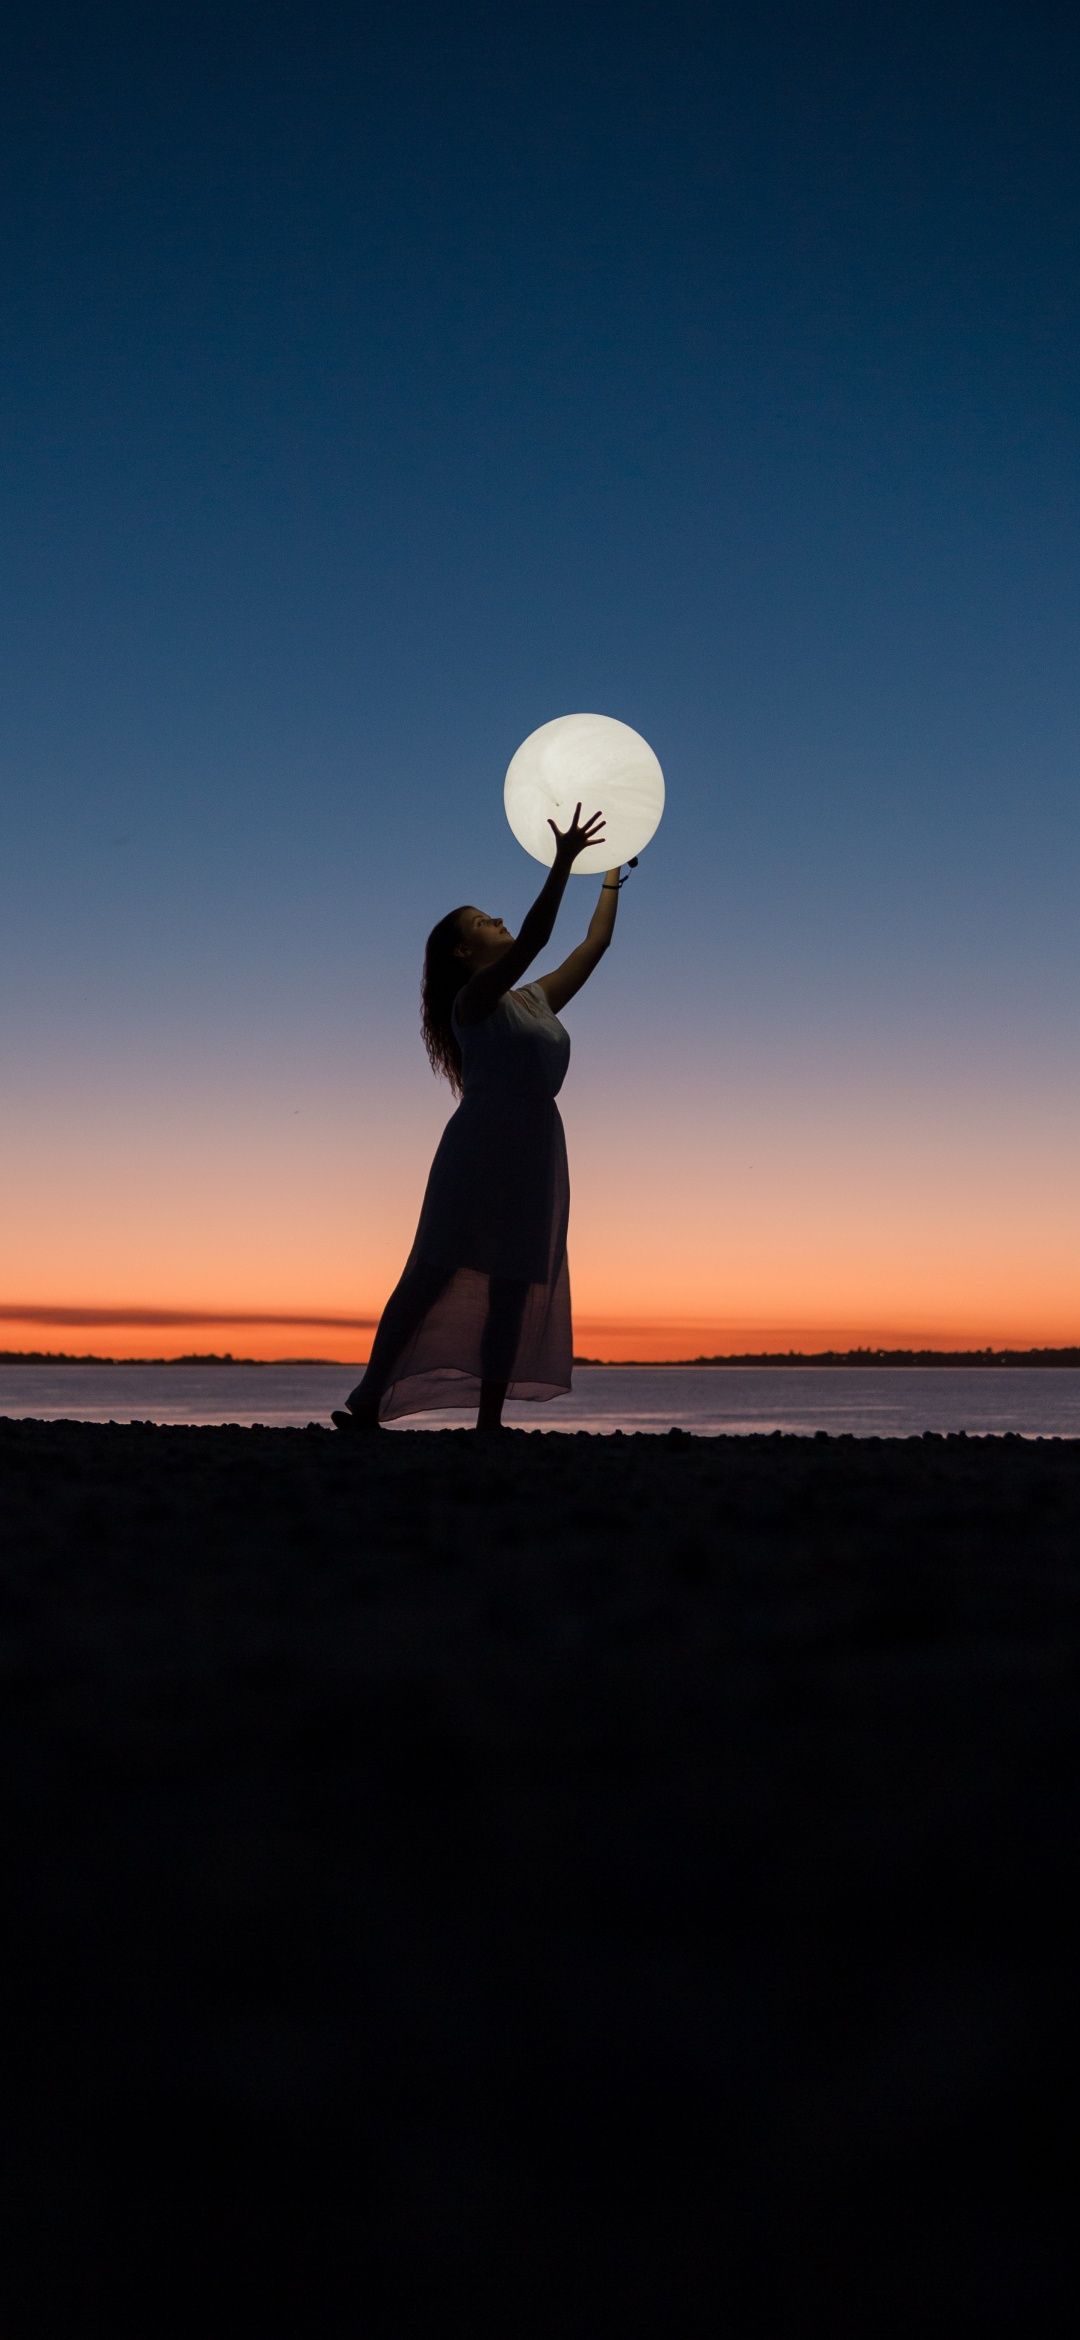 IPhone wallpaper of a woman holding the moon at the beach during sunset - Photography